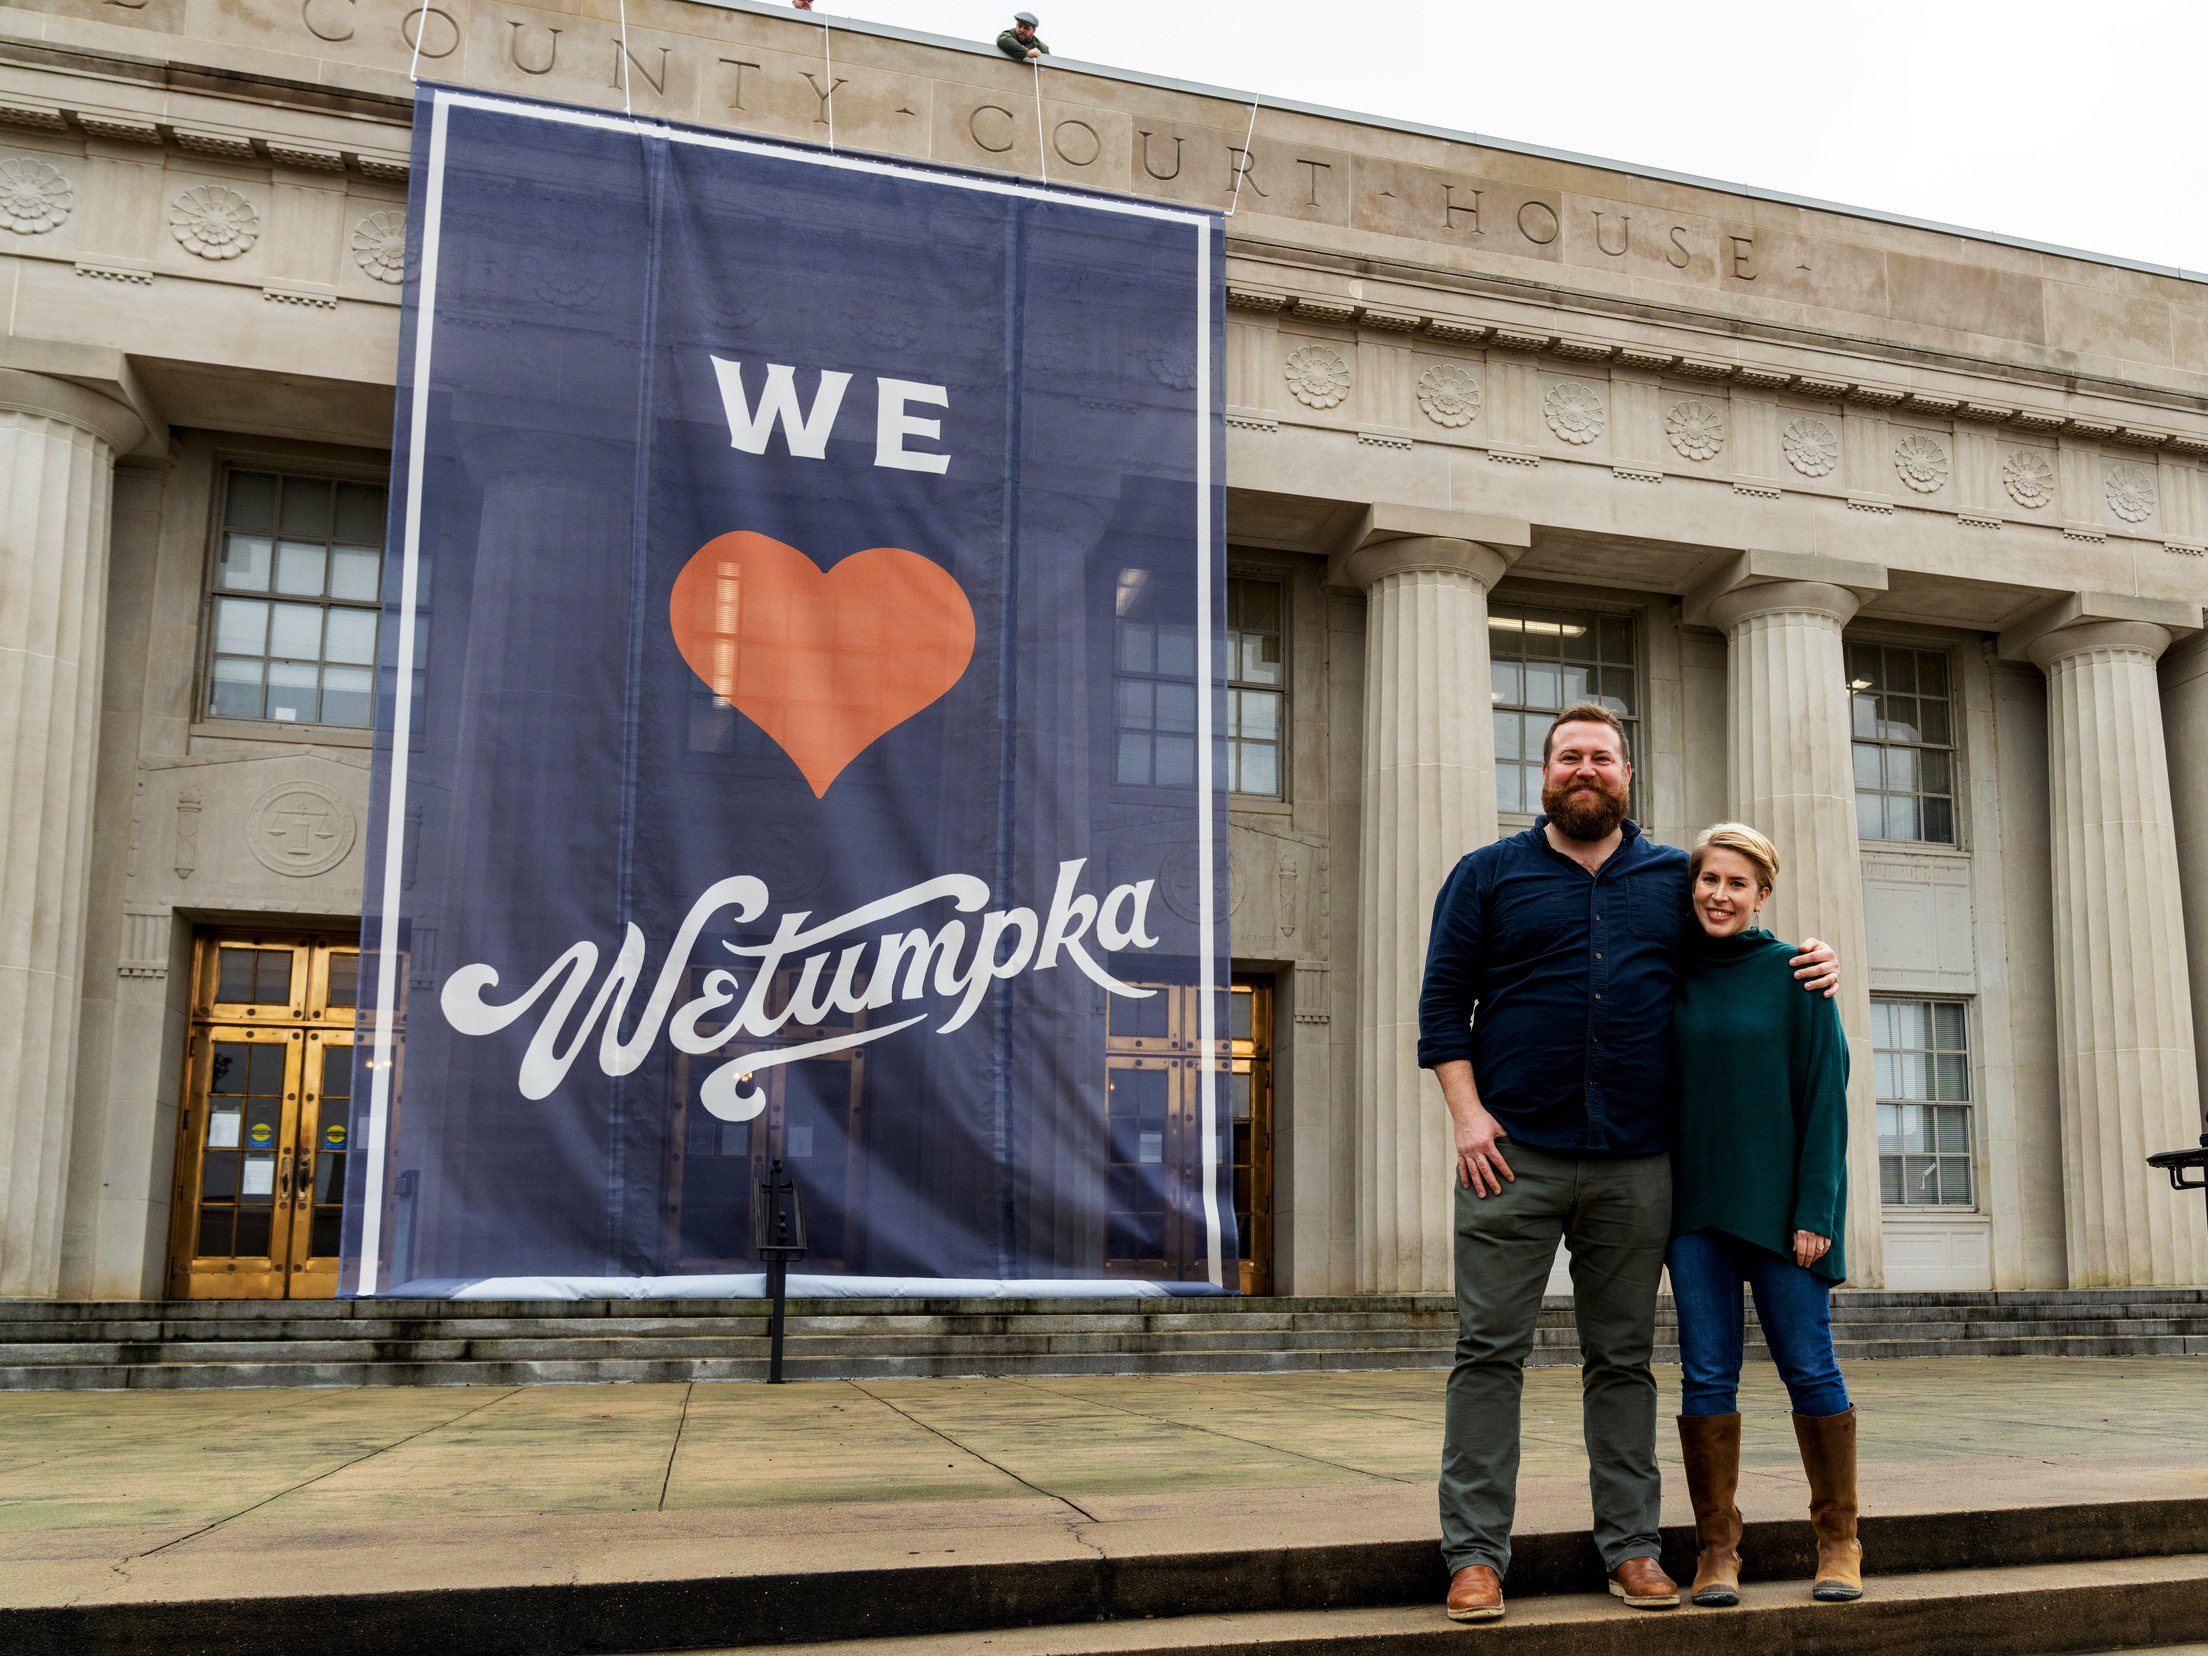 As seen on Home Town Takeover, Ben and Erin Napier pose during the reveal of a large banner at Elmore County Court House in Wetumpka, Alabama.